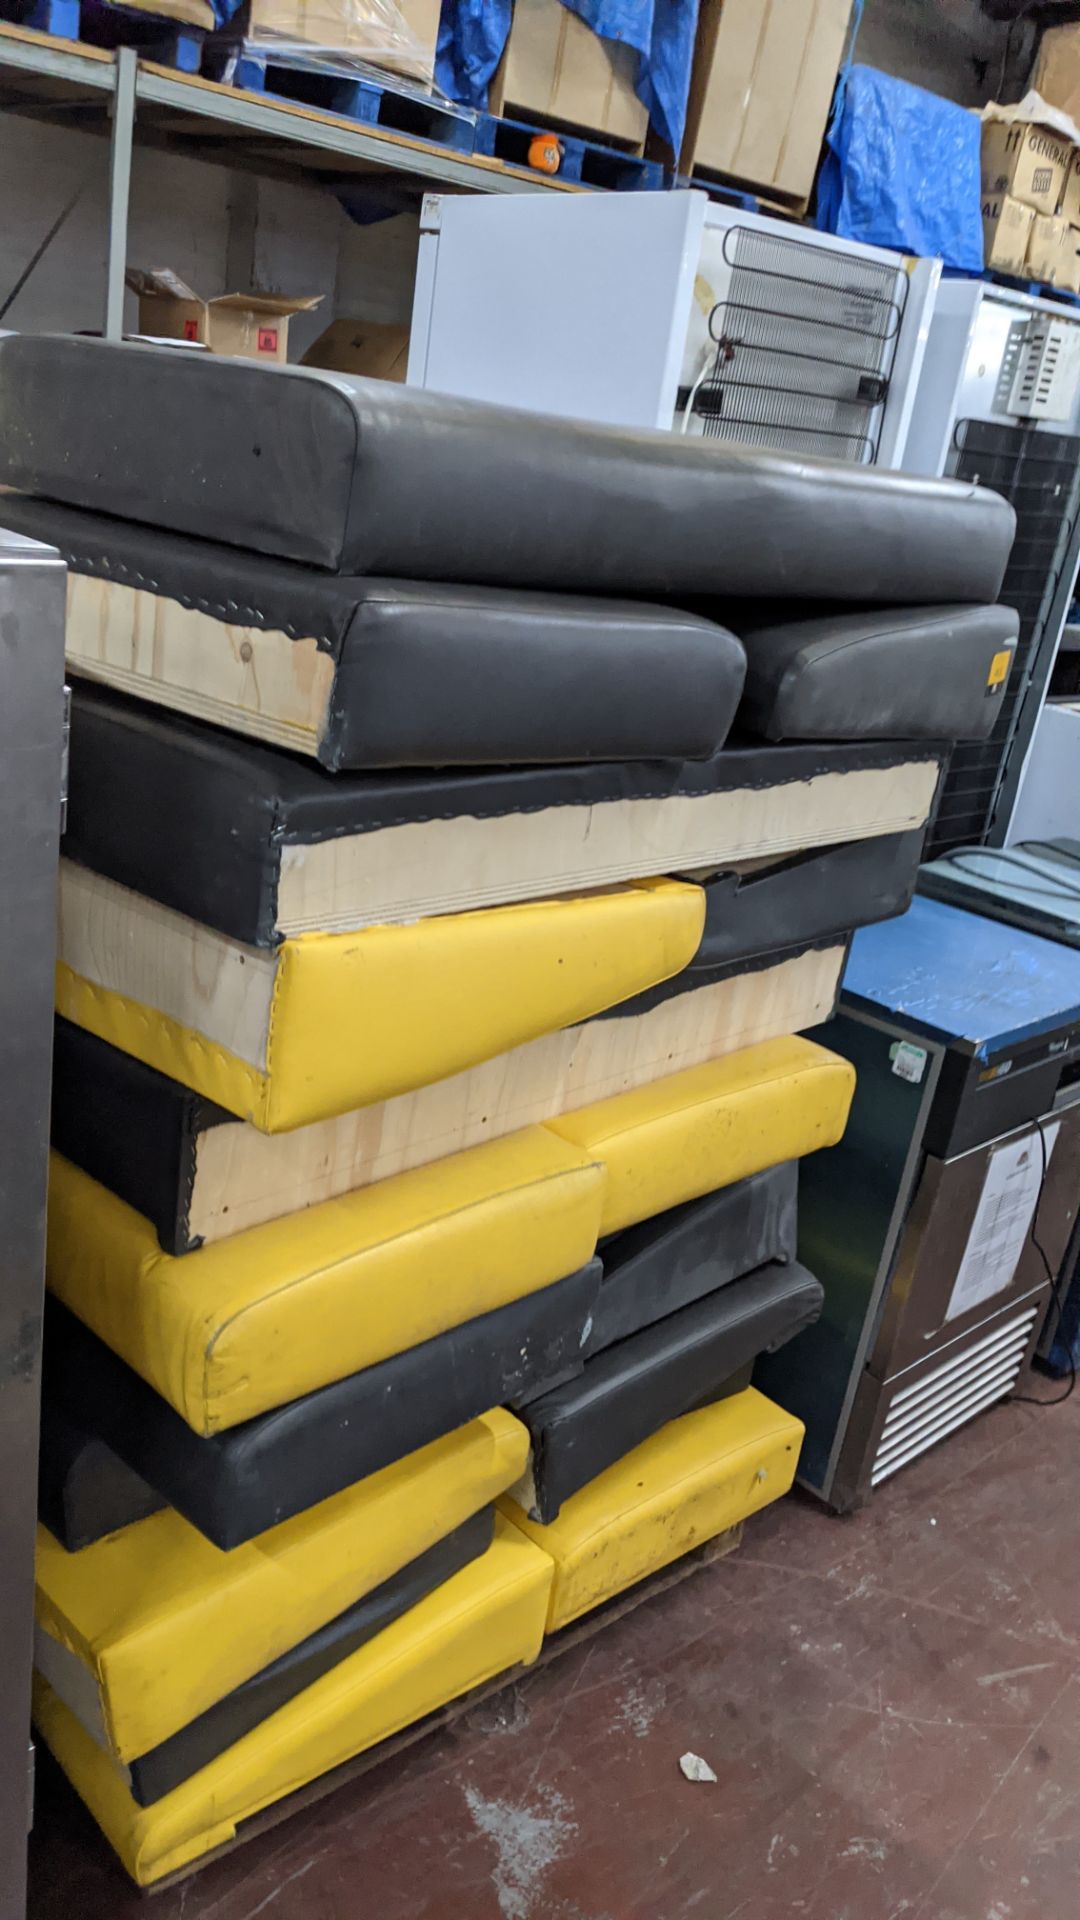 Stack of bench/banquet seating padded seat bases/backs